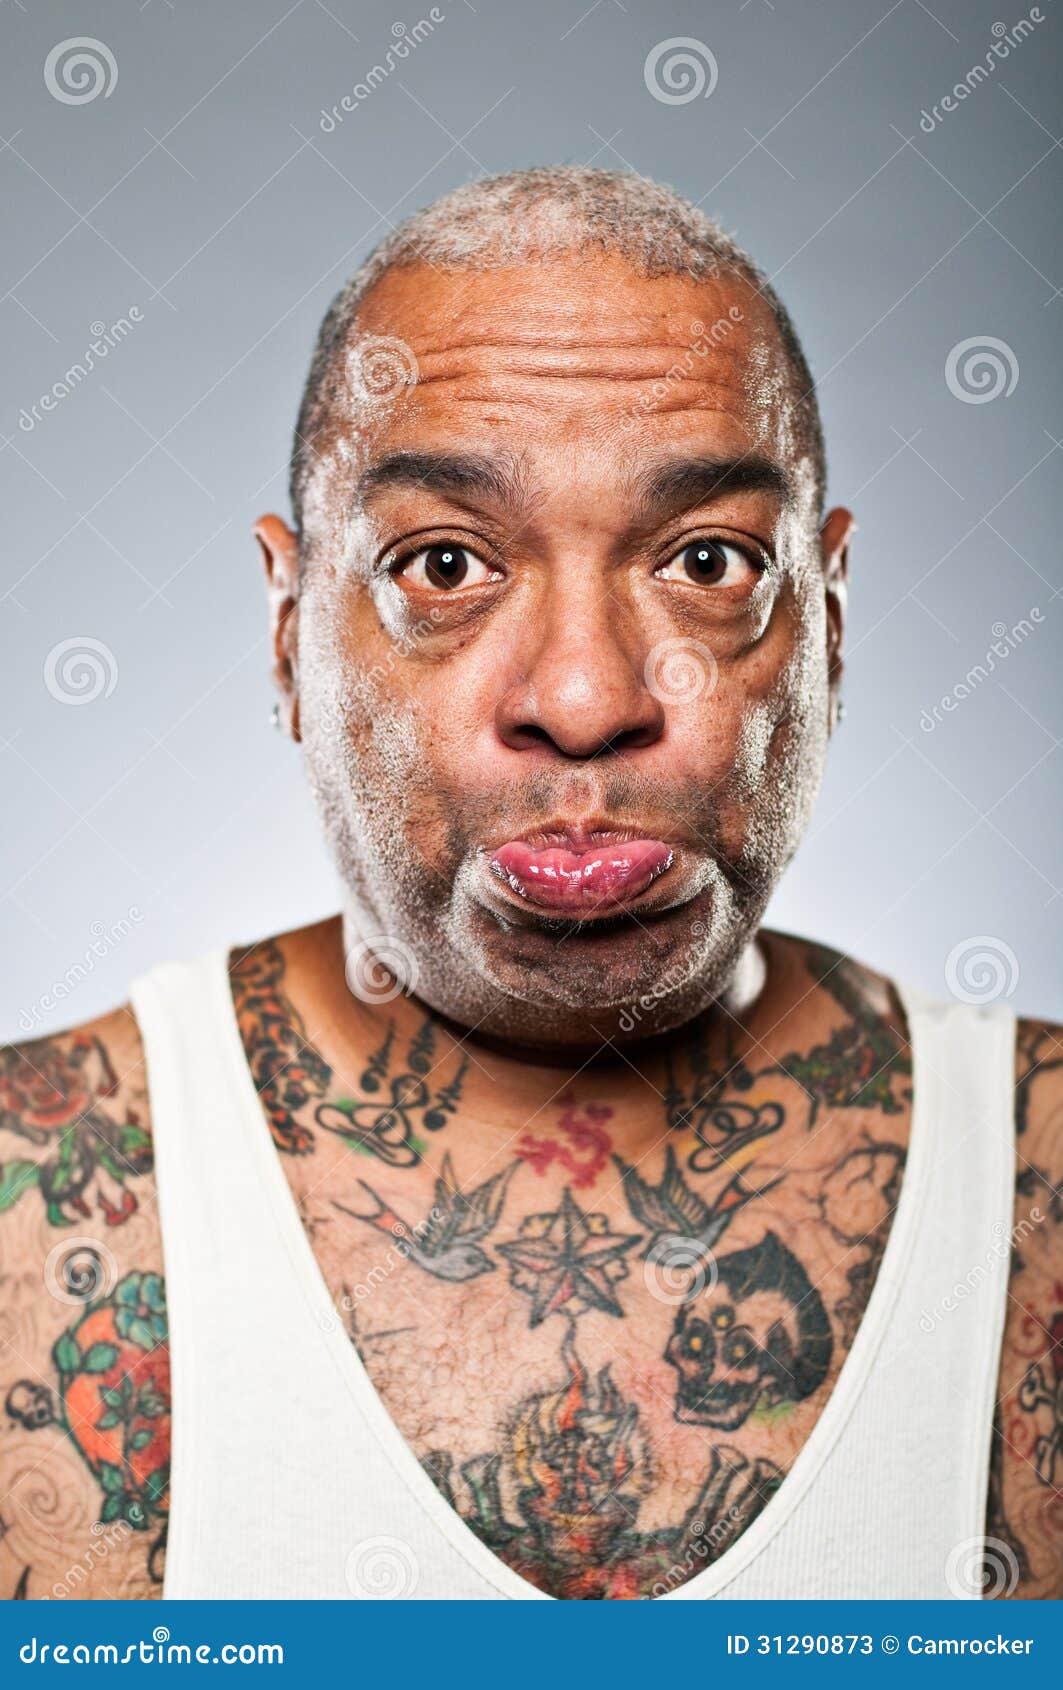 Stylish African American Man with Many Tattoos Pouting Stock Image - Image of pouting, tattoo: 31290873